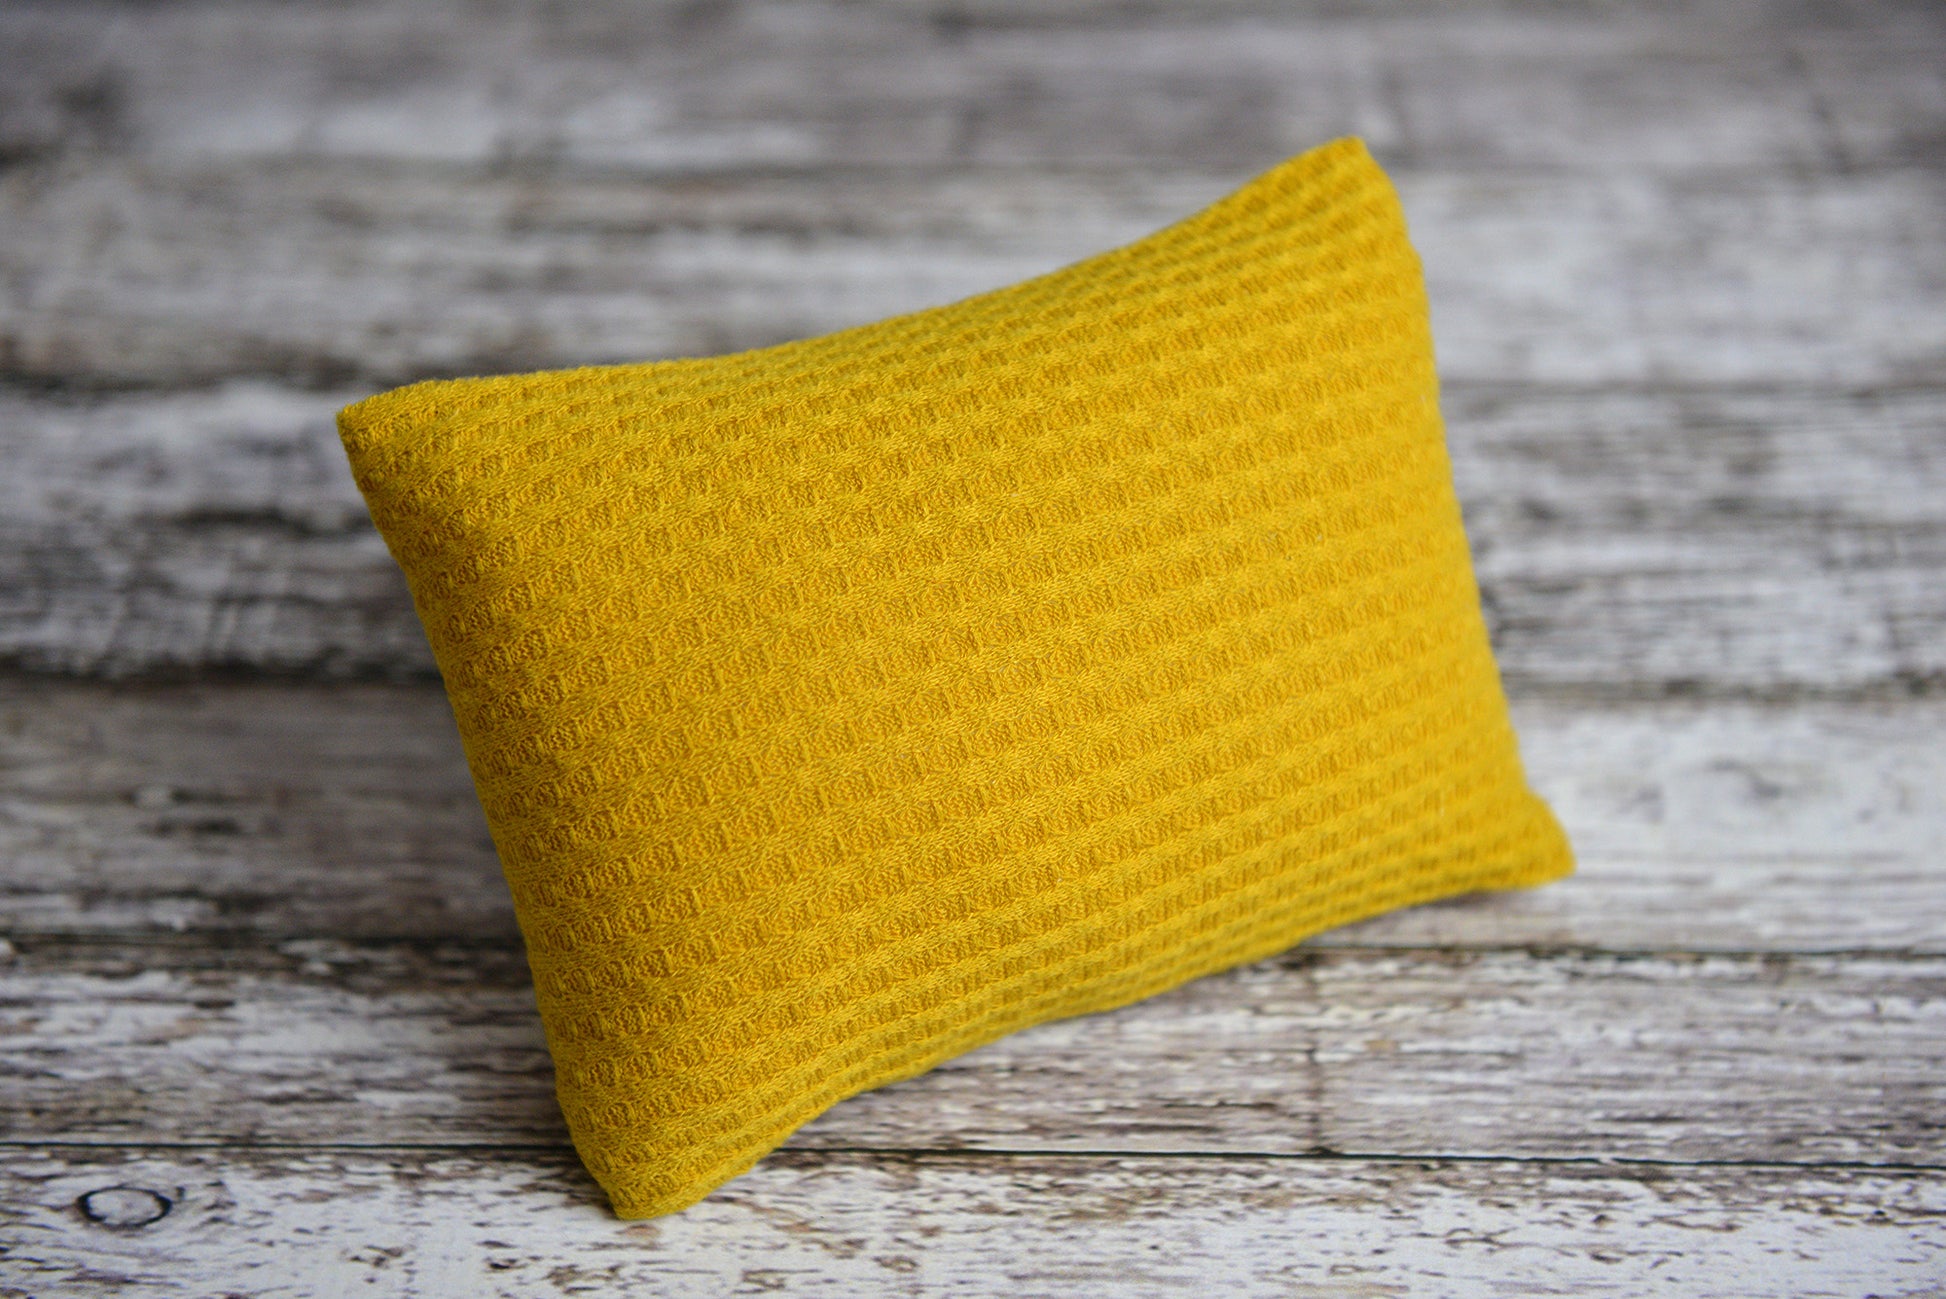 Mini Pillow with Cover - Perforated - Mustard-Newborn Photography Props